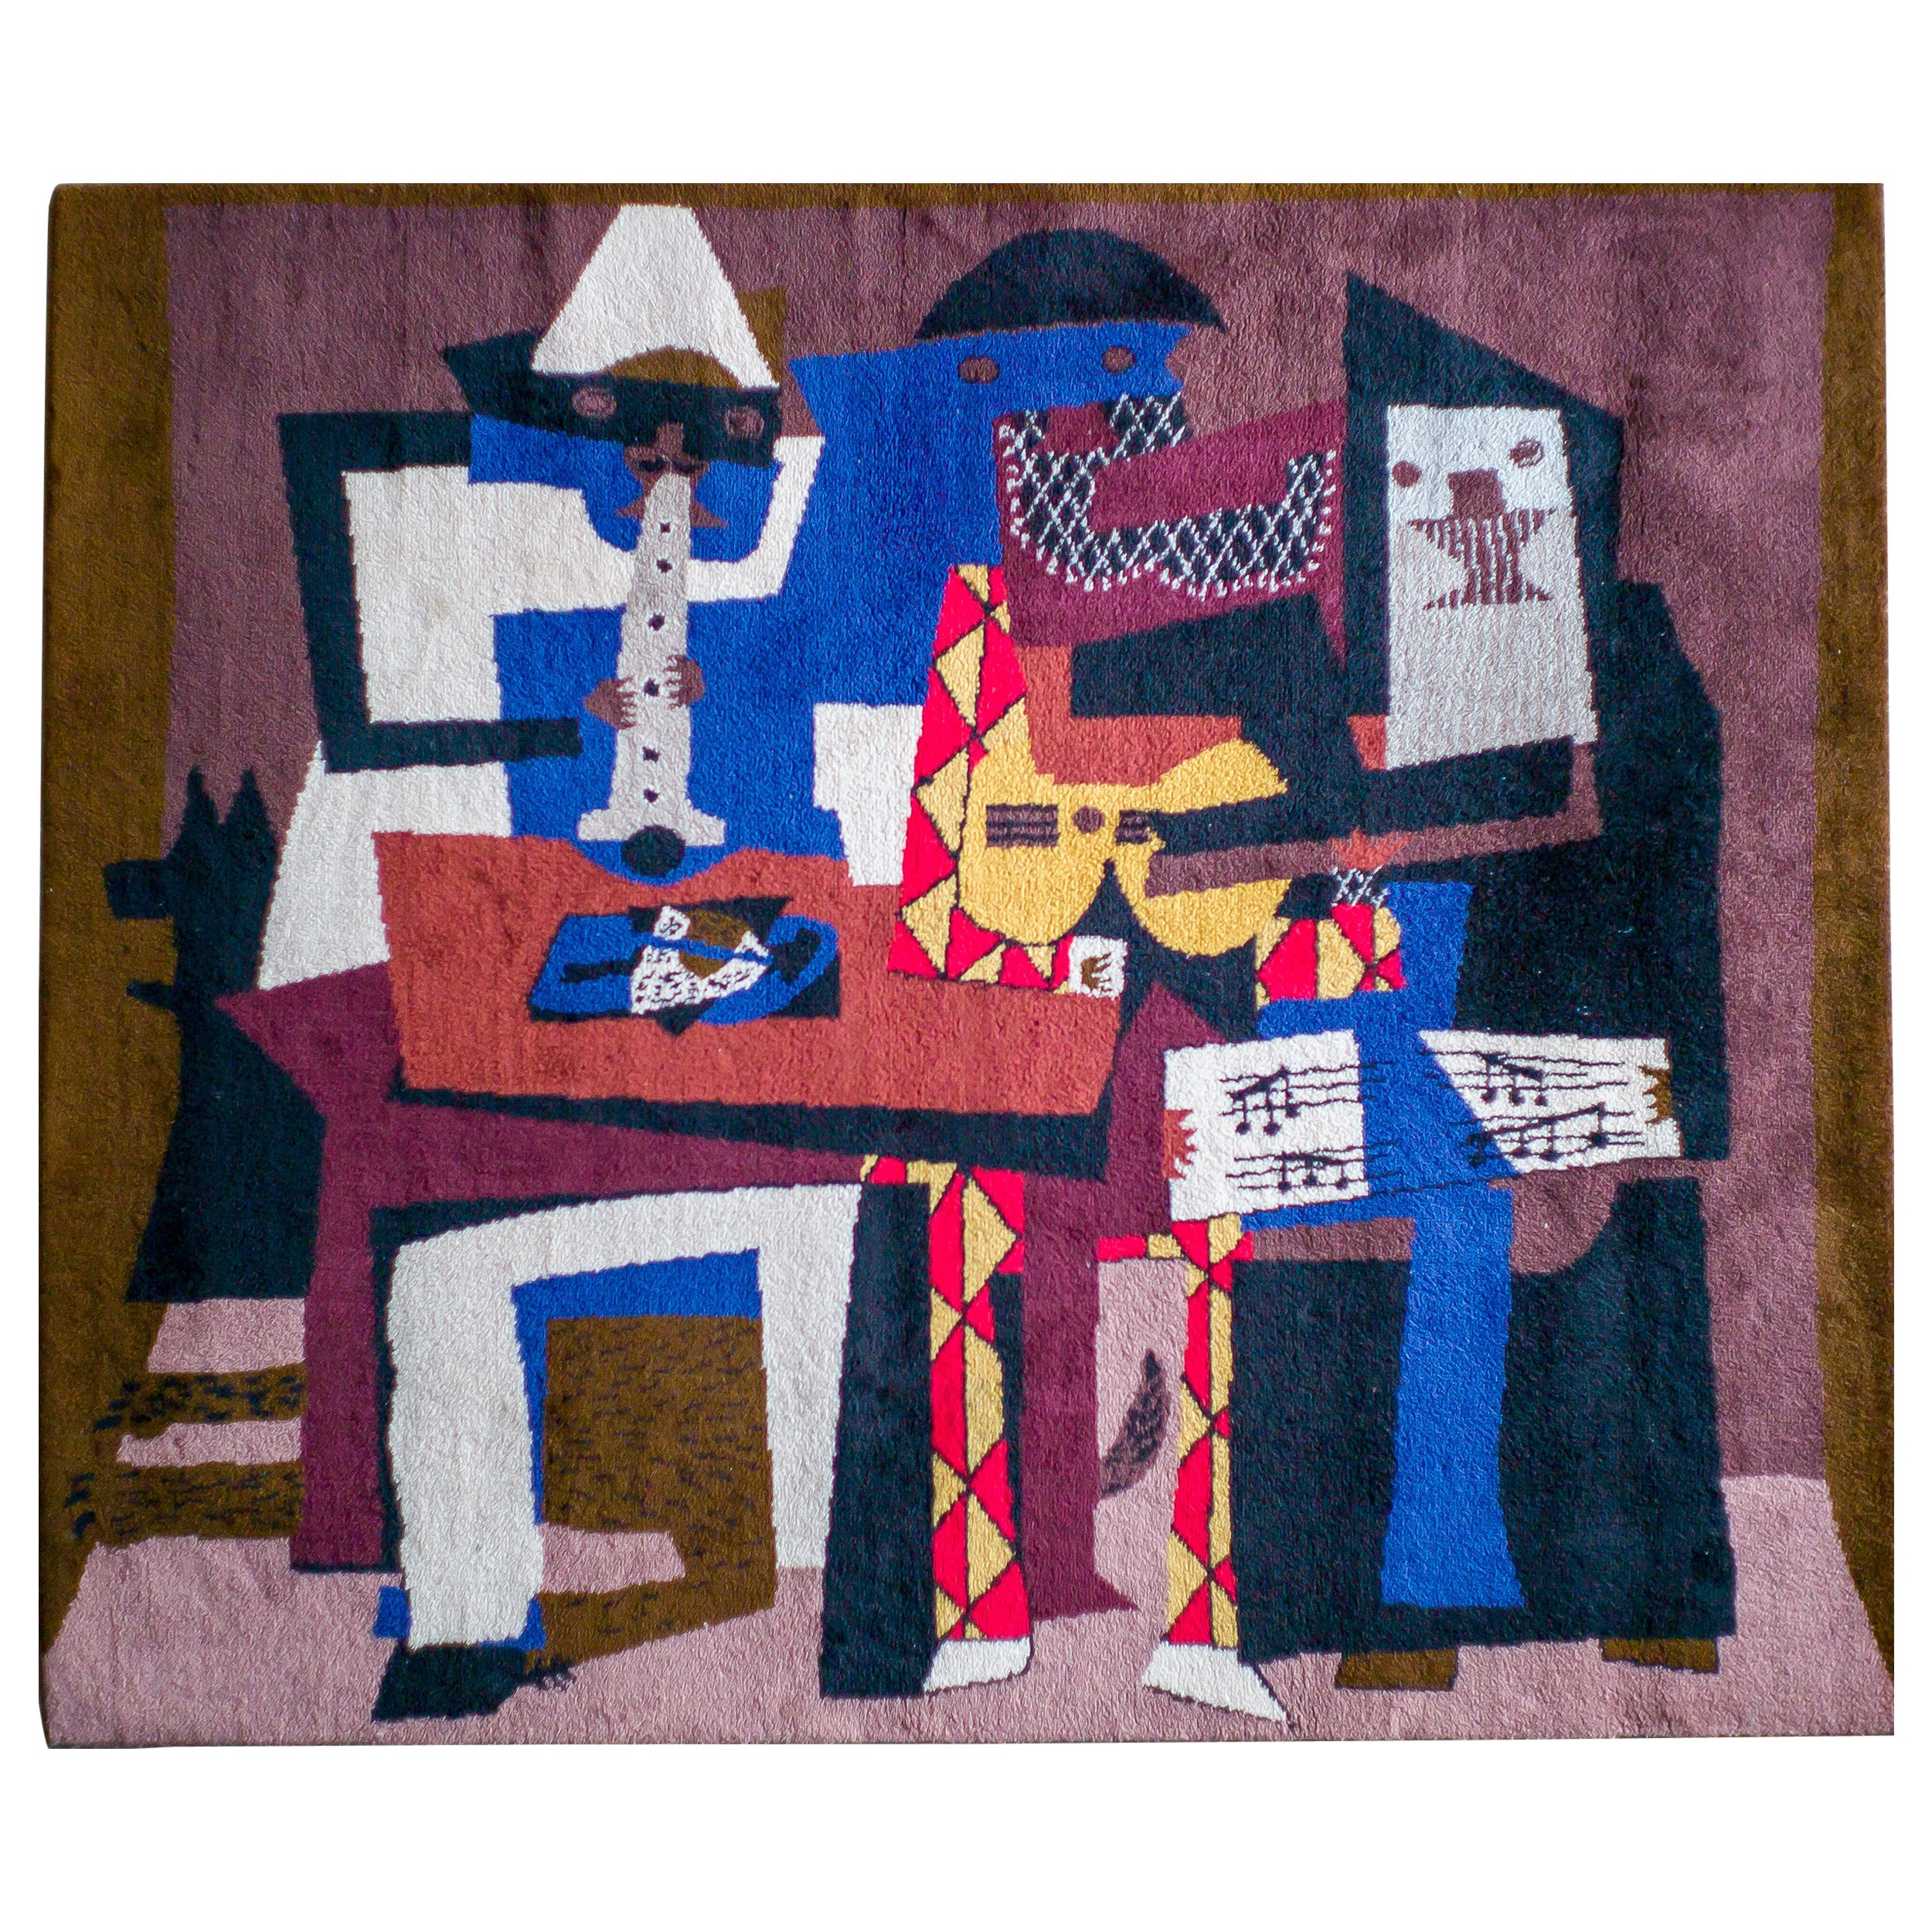 "Musicos Con Mascaras", Large Wool Tapestry After Pablo Picasso